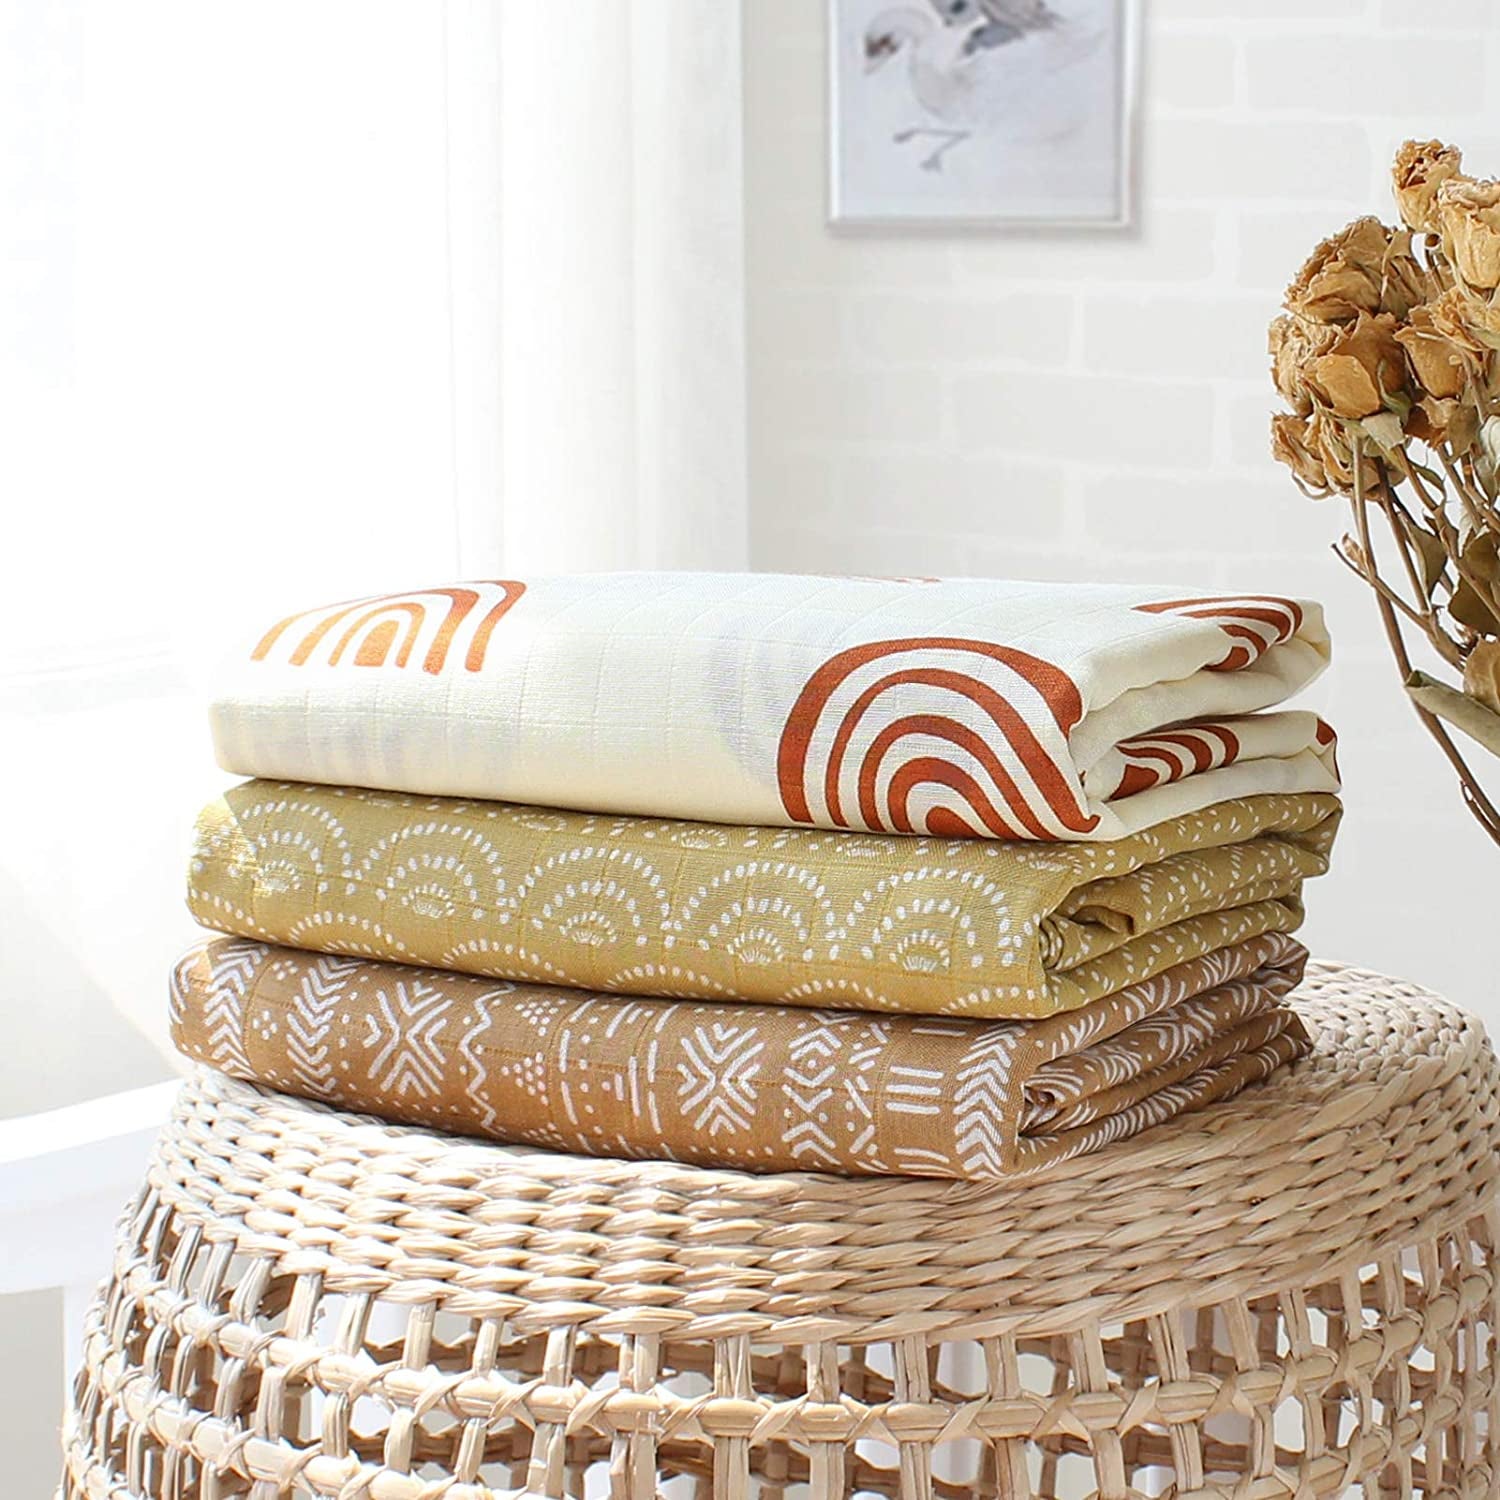 Three patterned bamboo cotton blankets stacked on top of a wicker basket